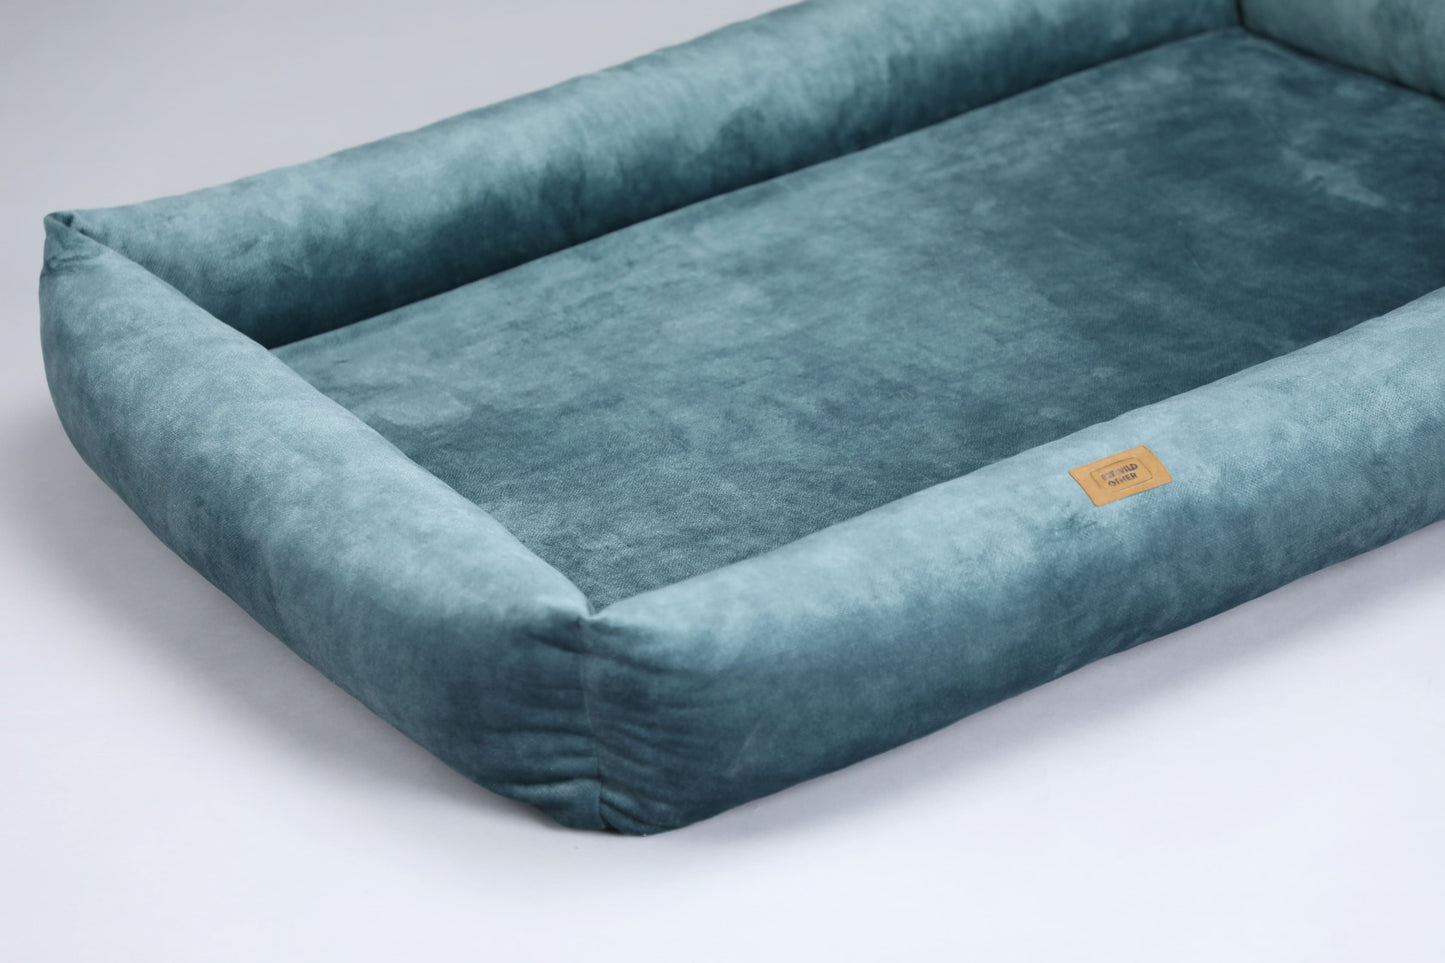 Premium dog bed with sides | 2-sided | DUSTY GREEN - premium dog goods handmade in Europe by My Wild Other